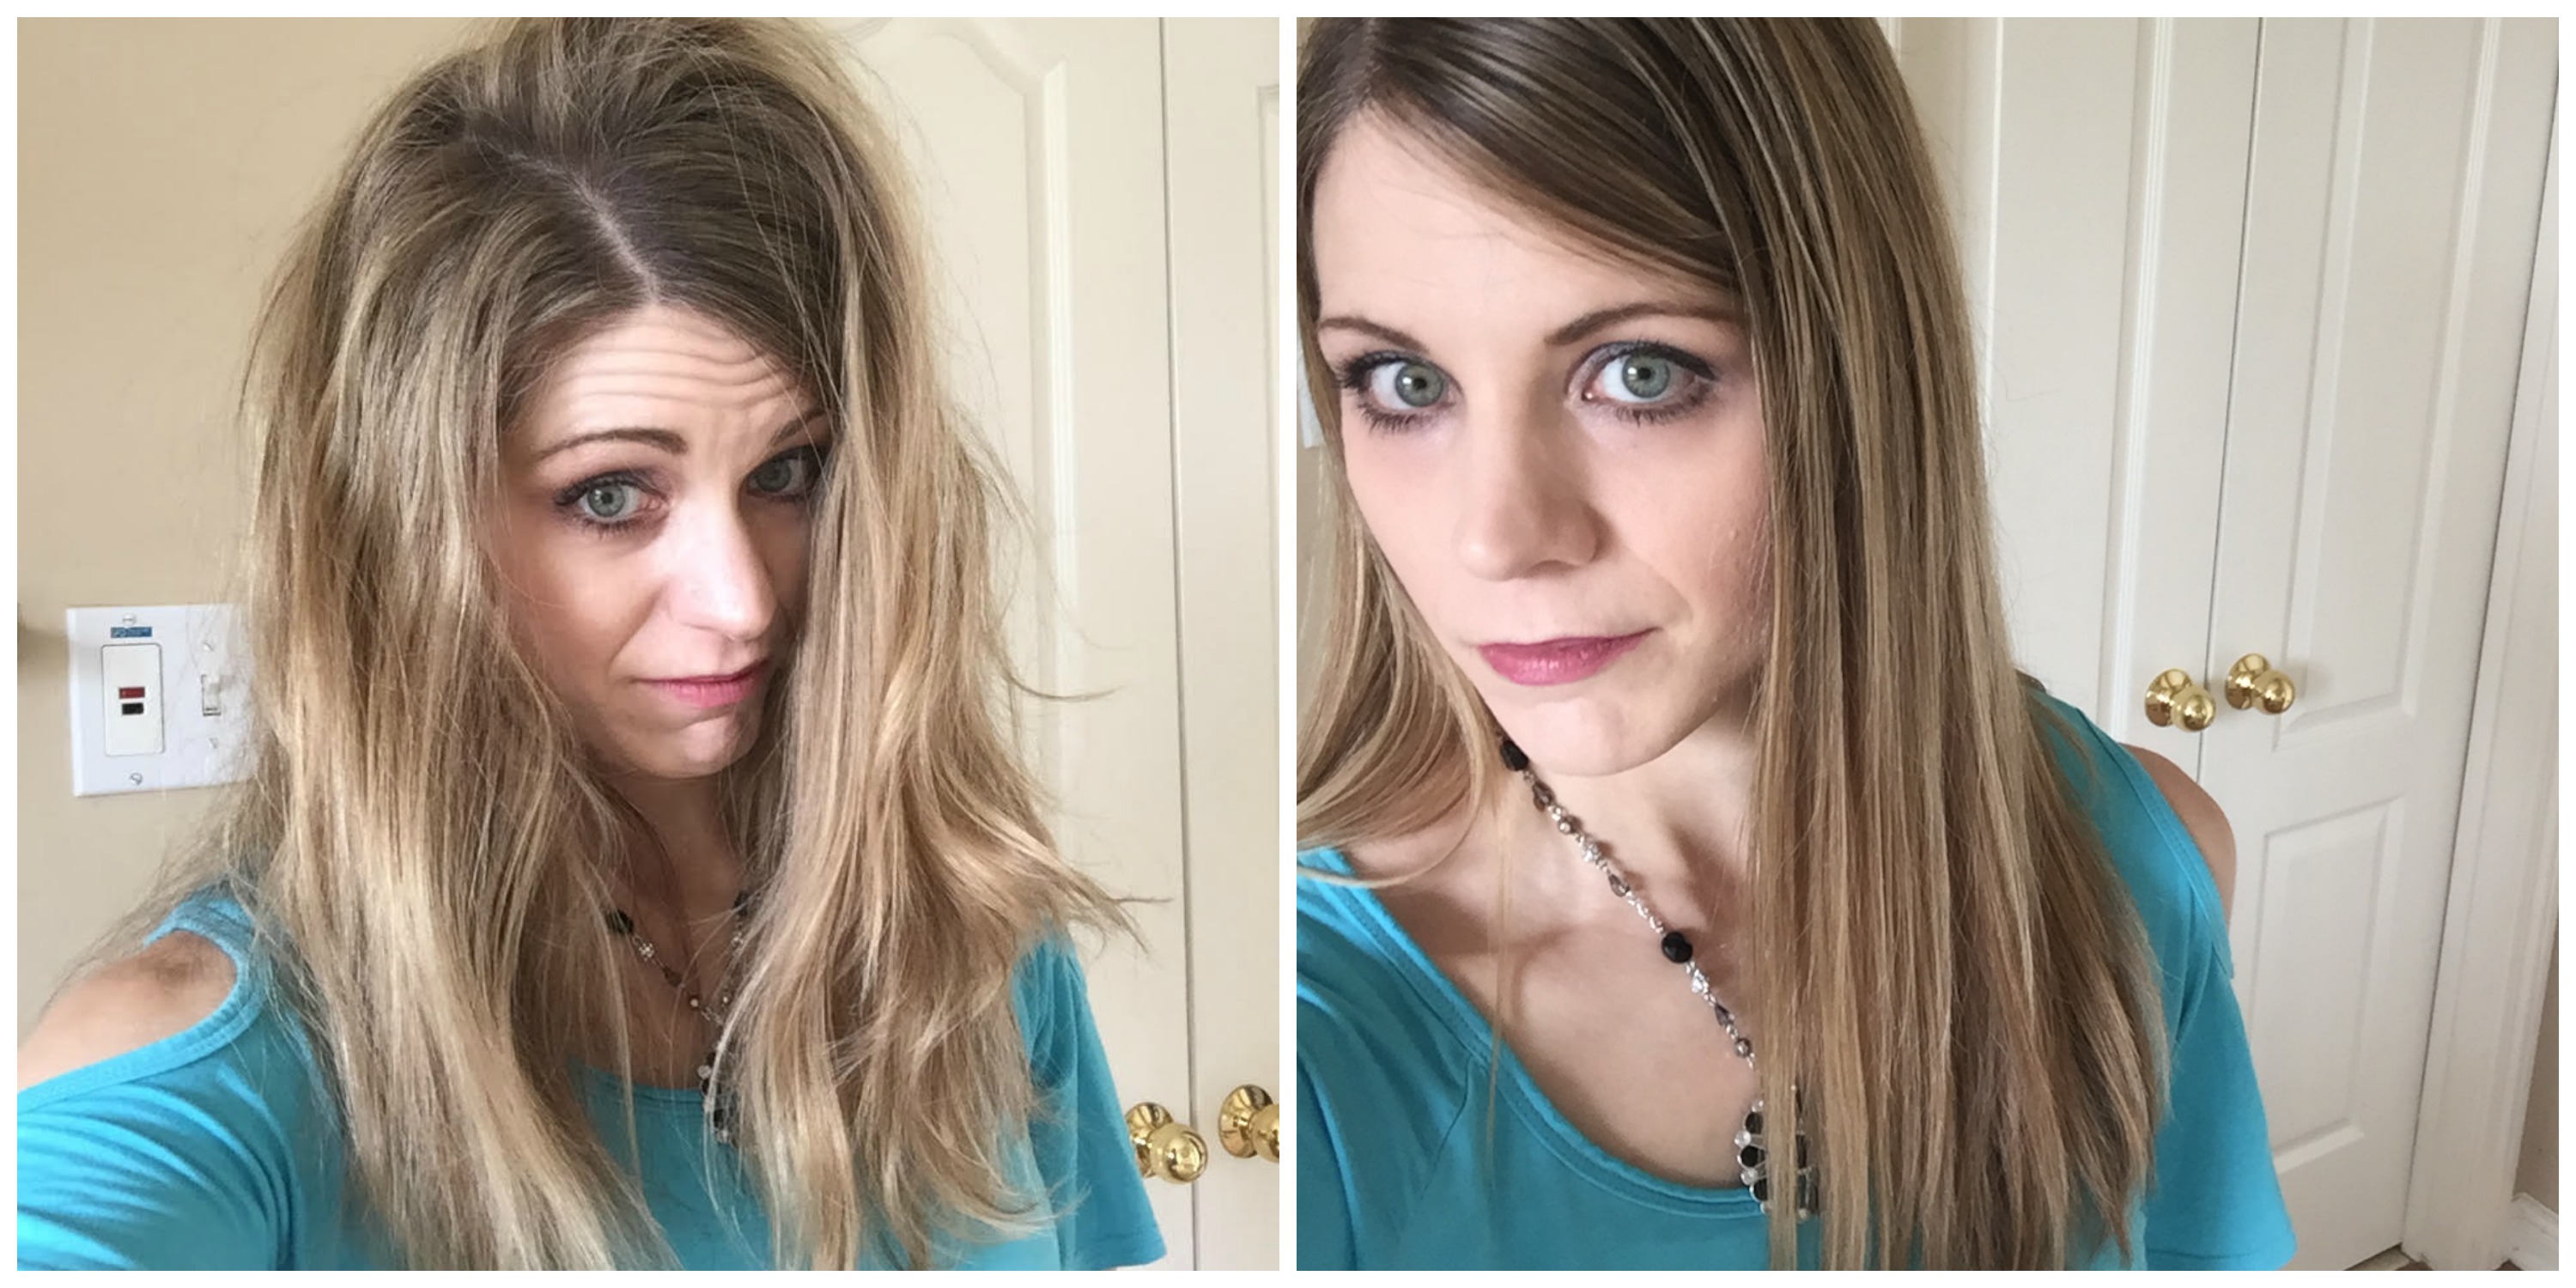 The Before and After Hair Photos You've Been Begging For